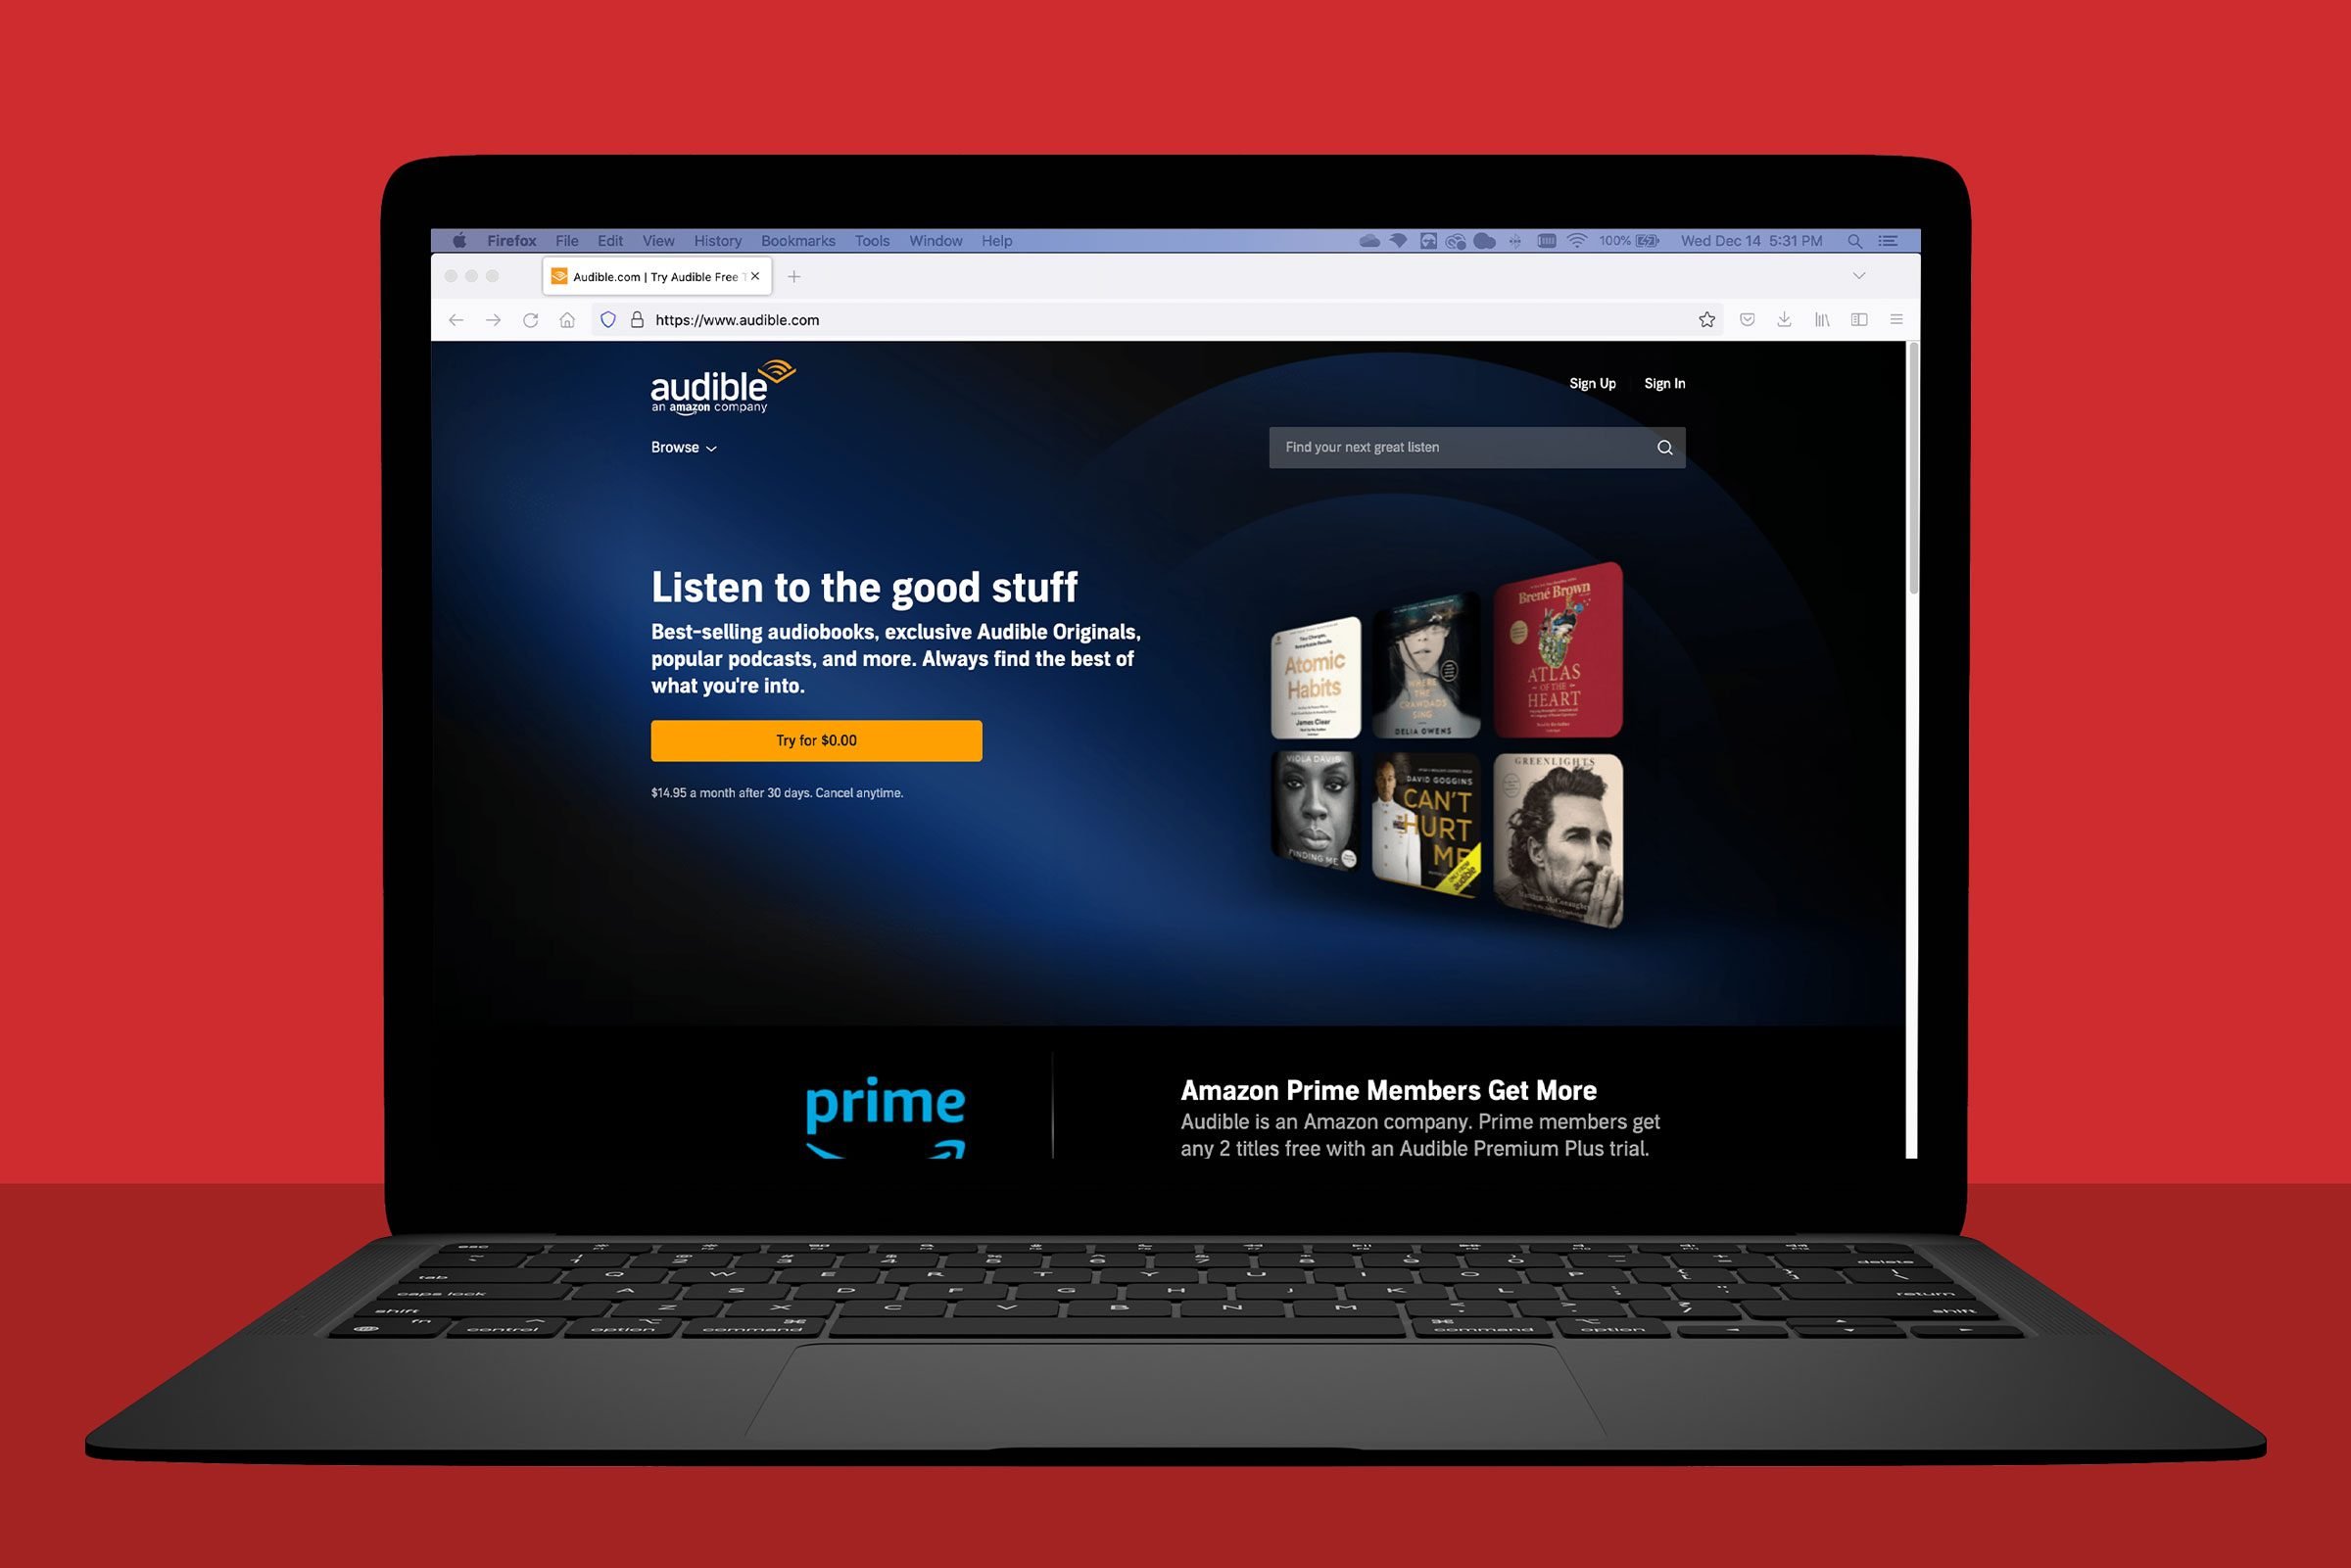 Prime Members: Access Free Audiobooks and Podcasts Through